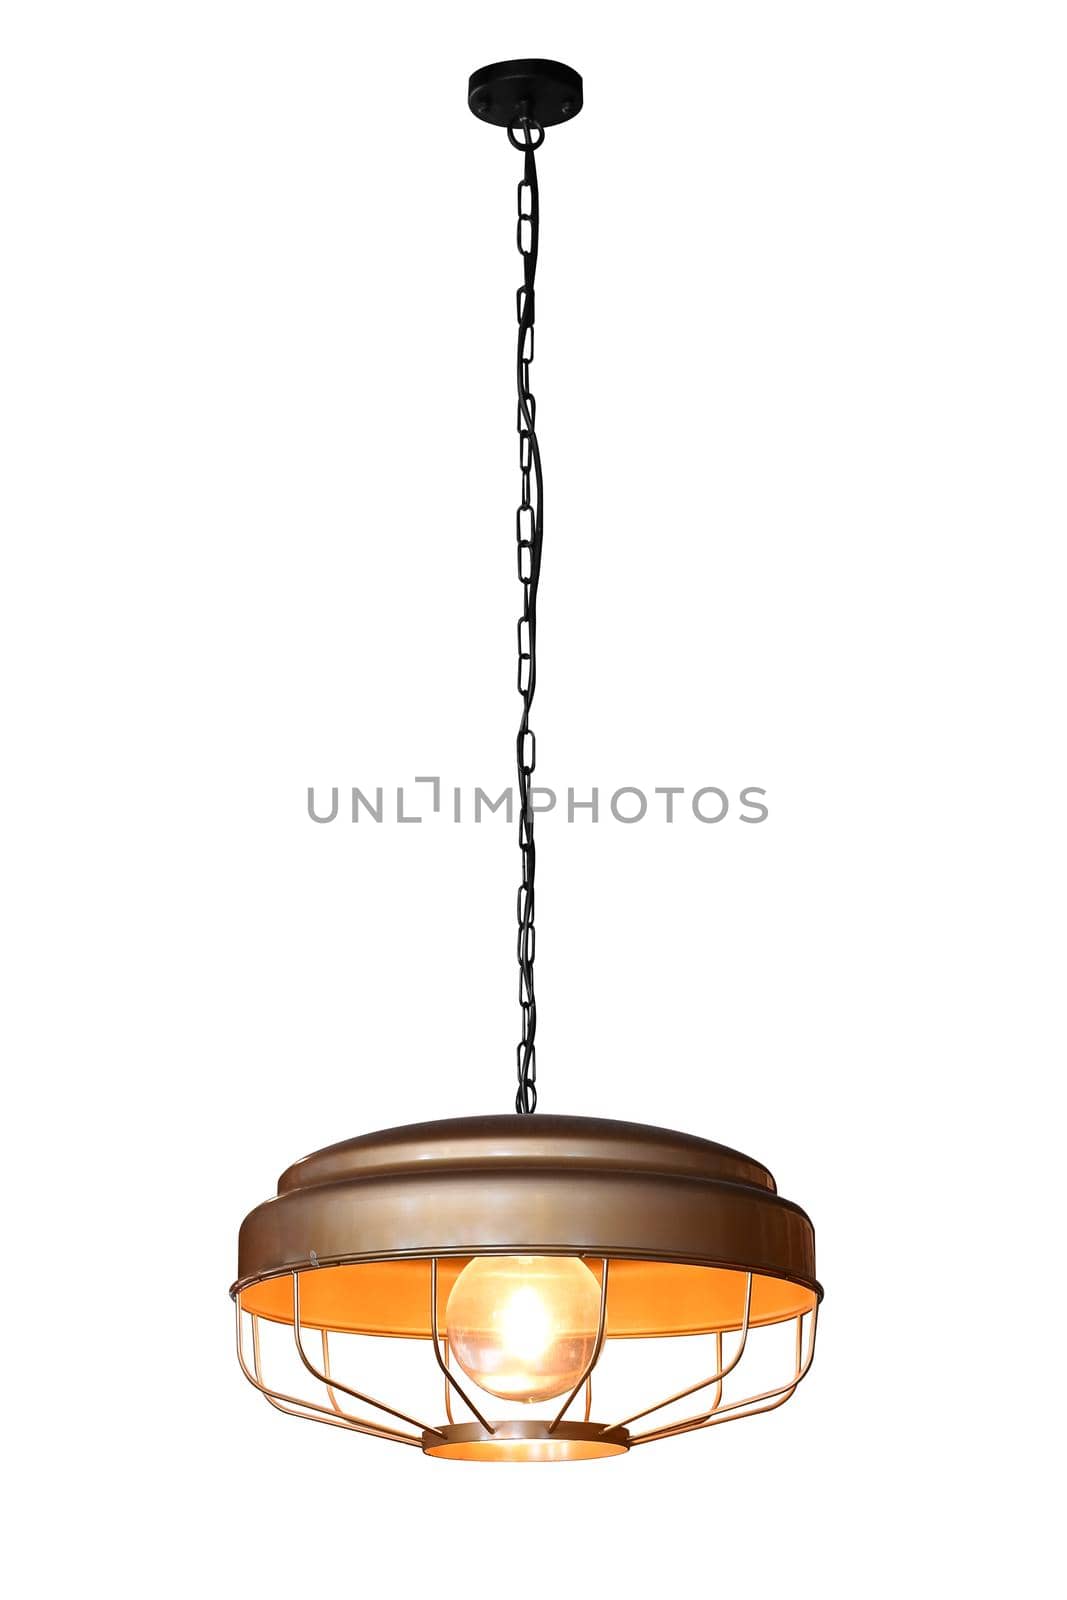 Hanging lamp isolated. by NuwatPhoto